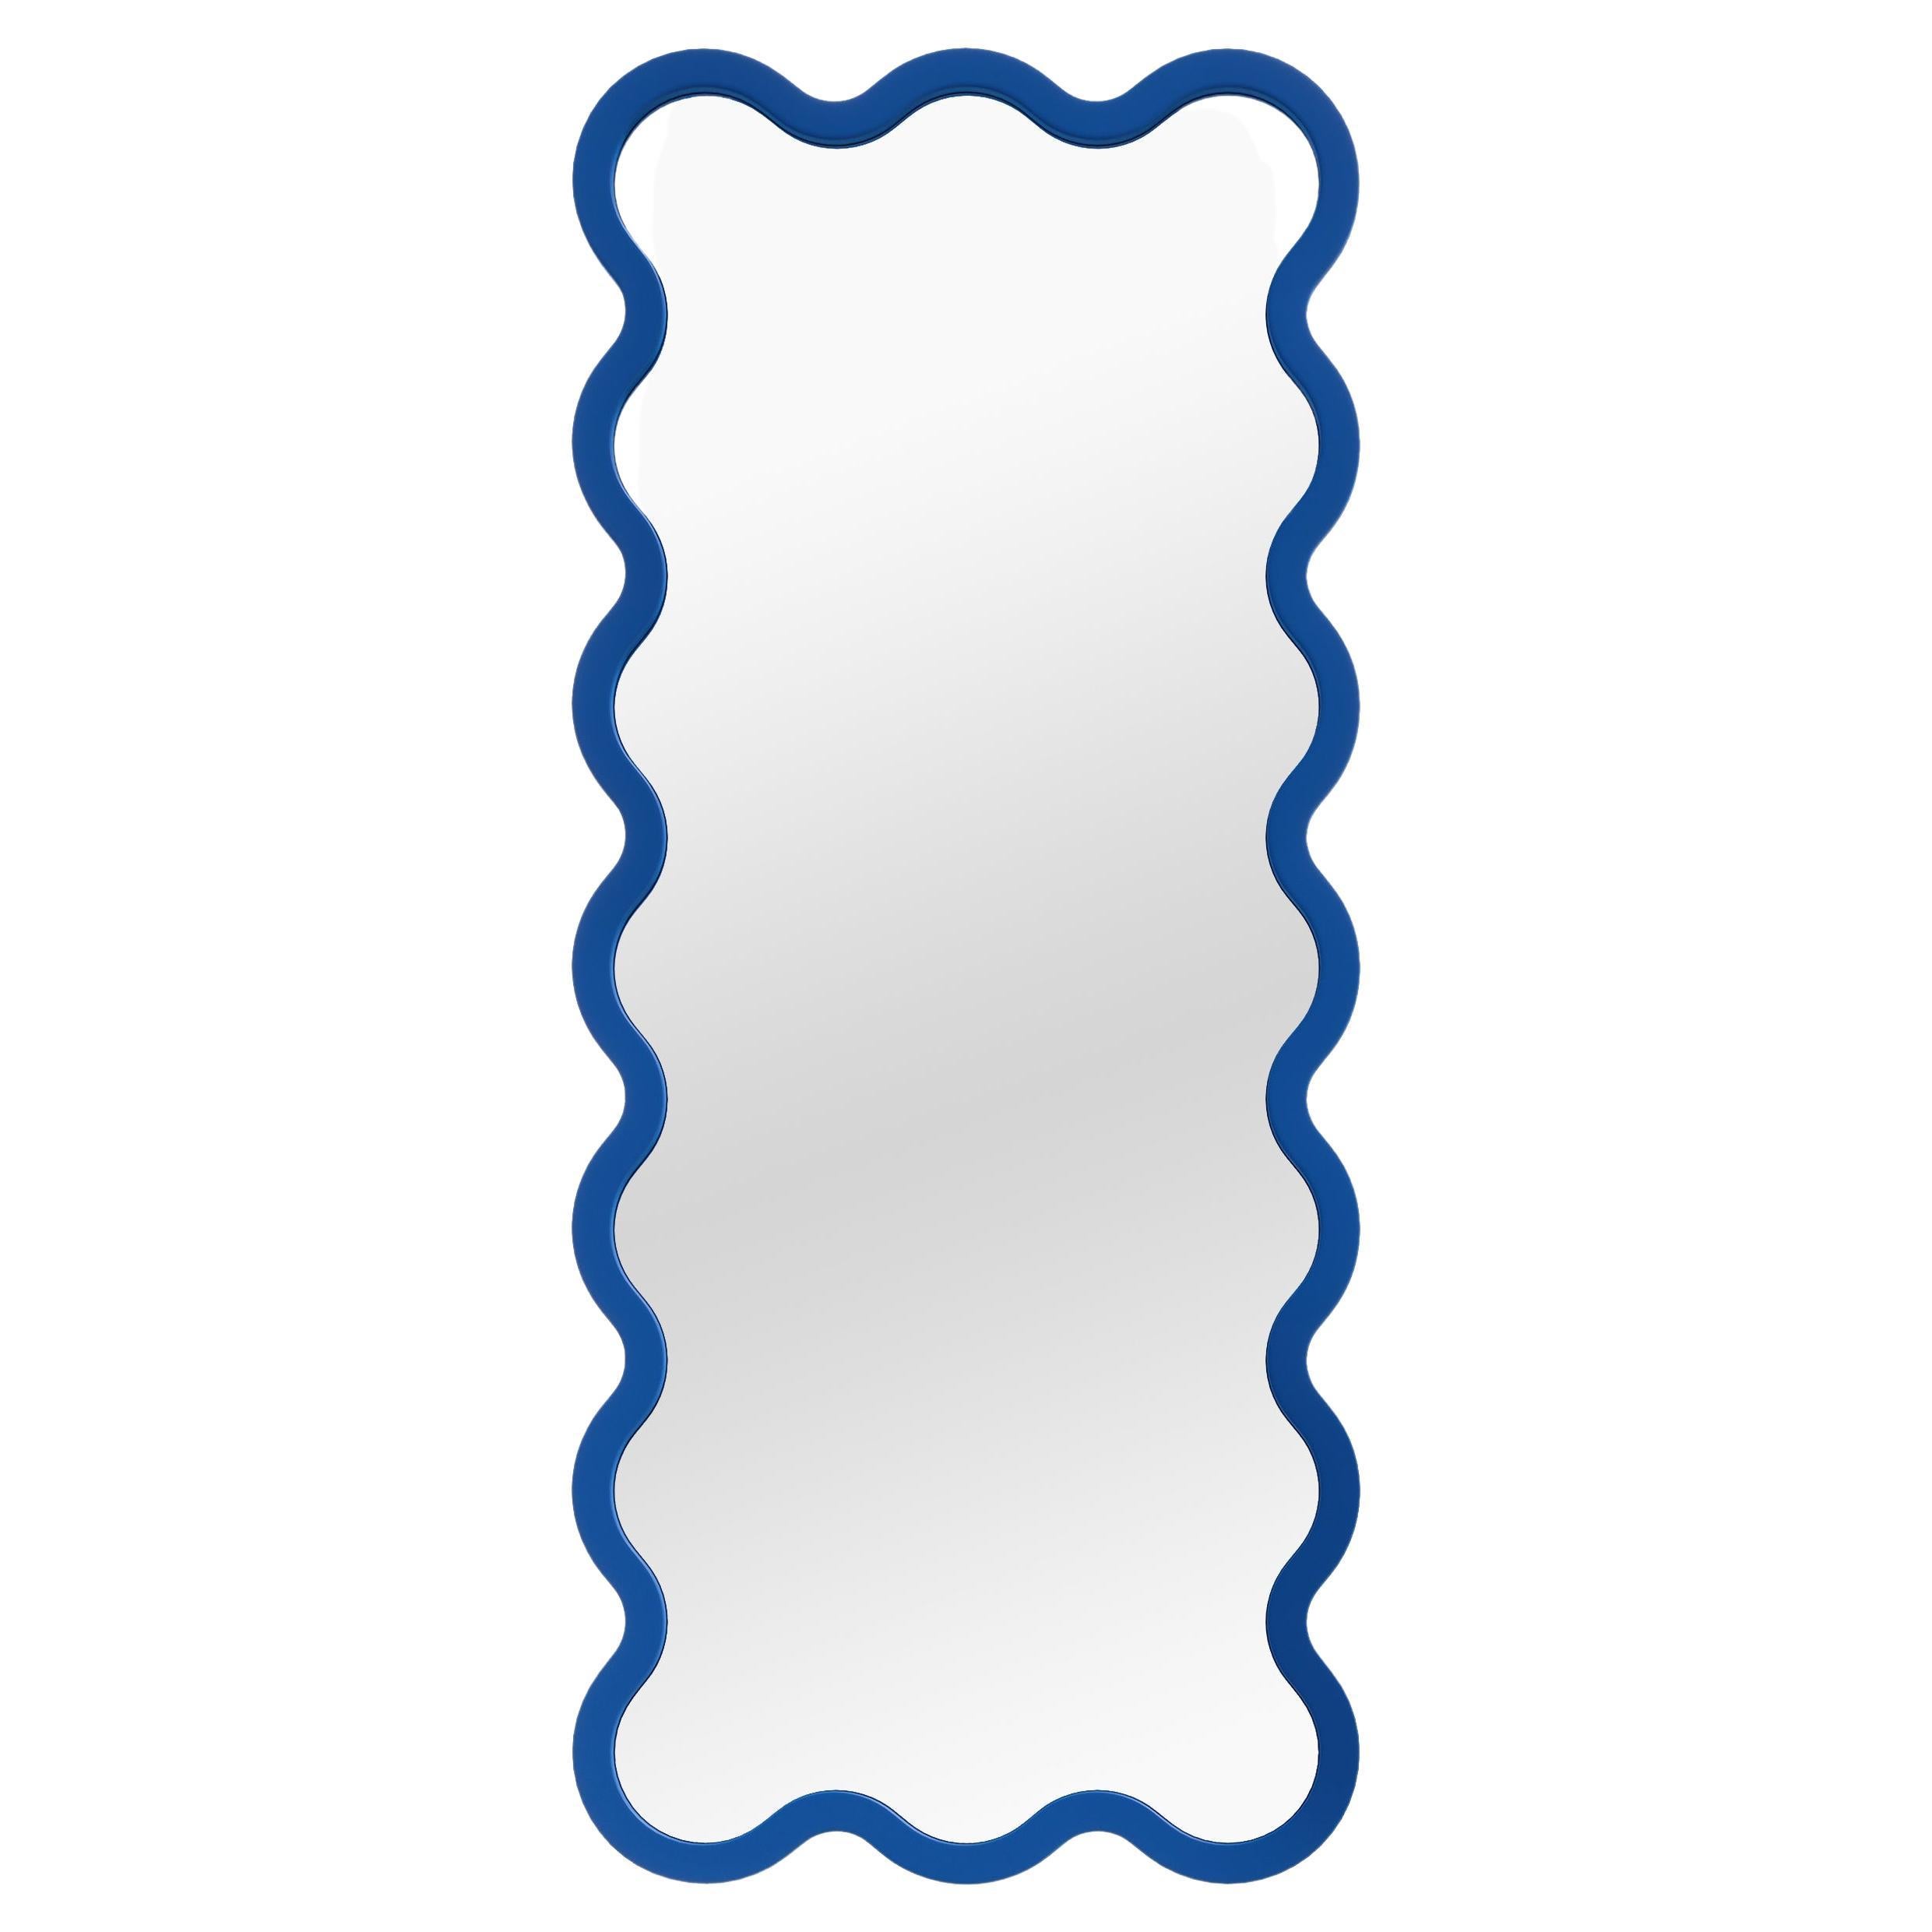 Contemporary Mirror 'Hvyli 16' by Oitoproducts, Blue Frame